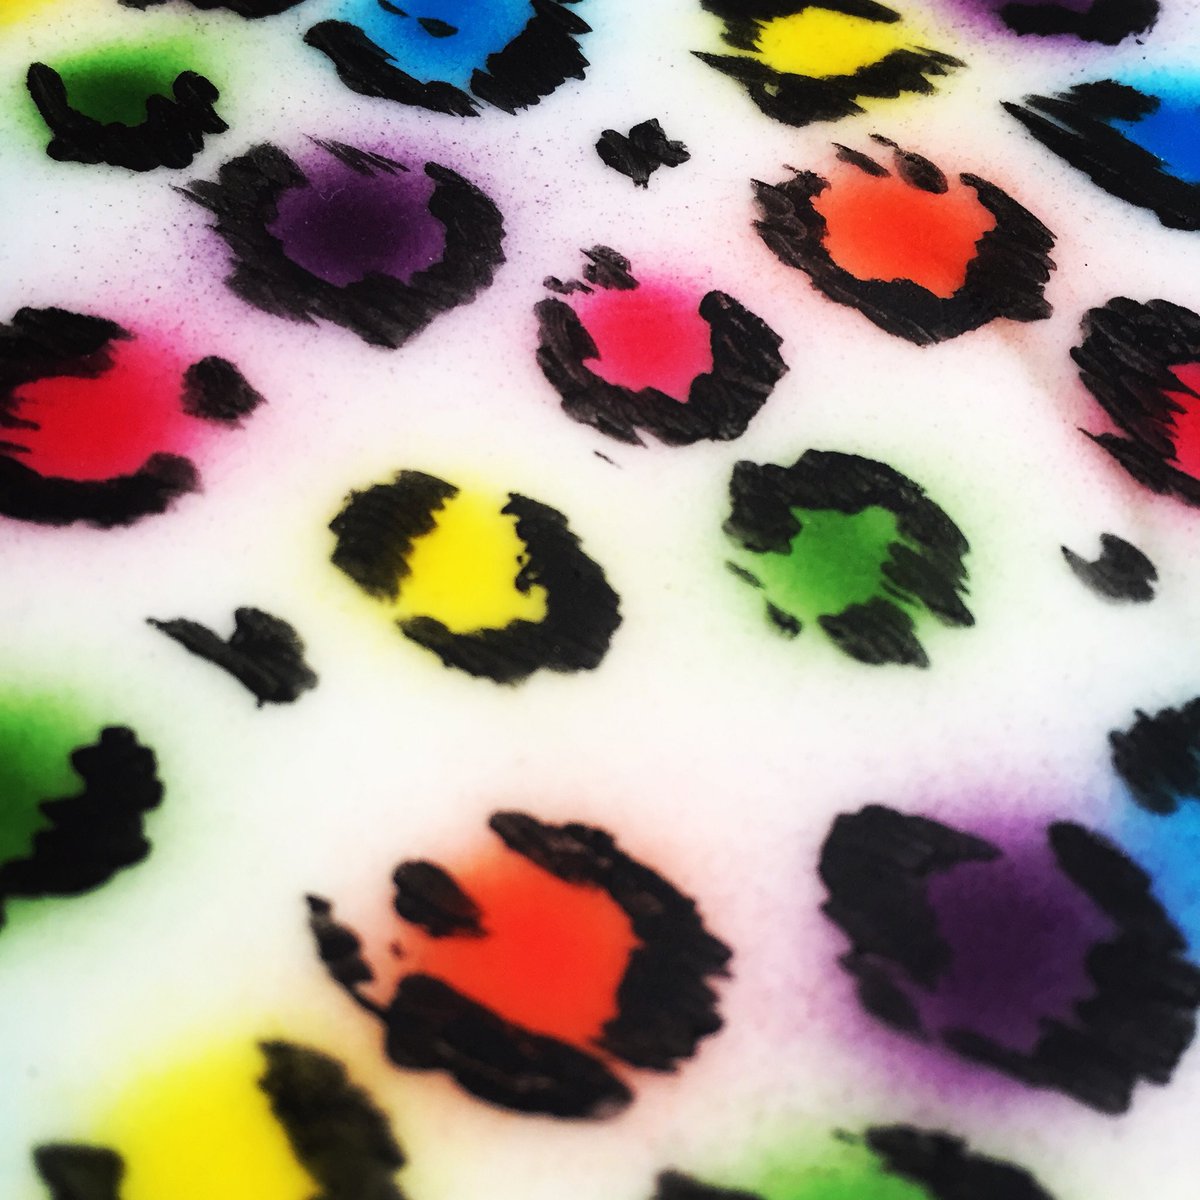 Sneak peek of a Neon leopard print on sugarpaste...the cake will be revealed in a couple of weeks stay tuned...#cake #cakedecorating #cakeart #handpainted #handpaintedcake #neon #leopard #leopardprint #edibles #londonlife #event #eventplanne #couturecakes fun #foodporn #birthday